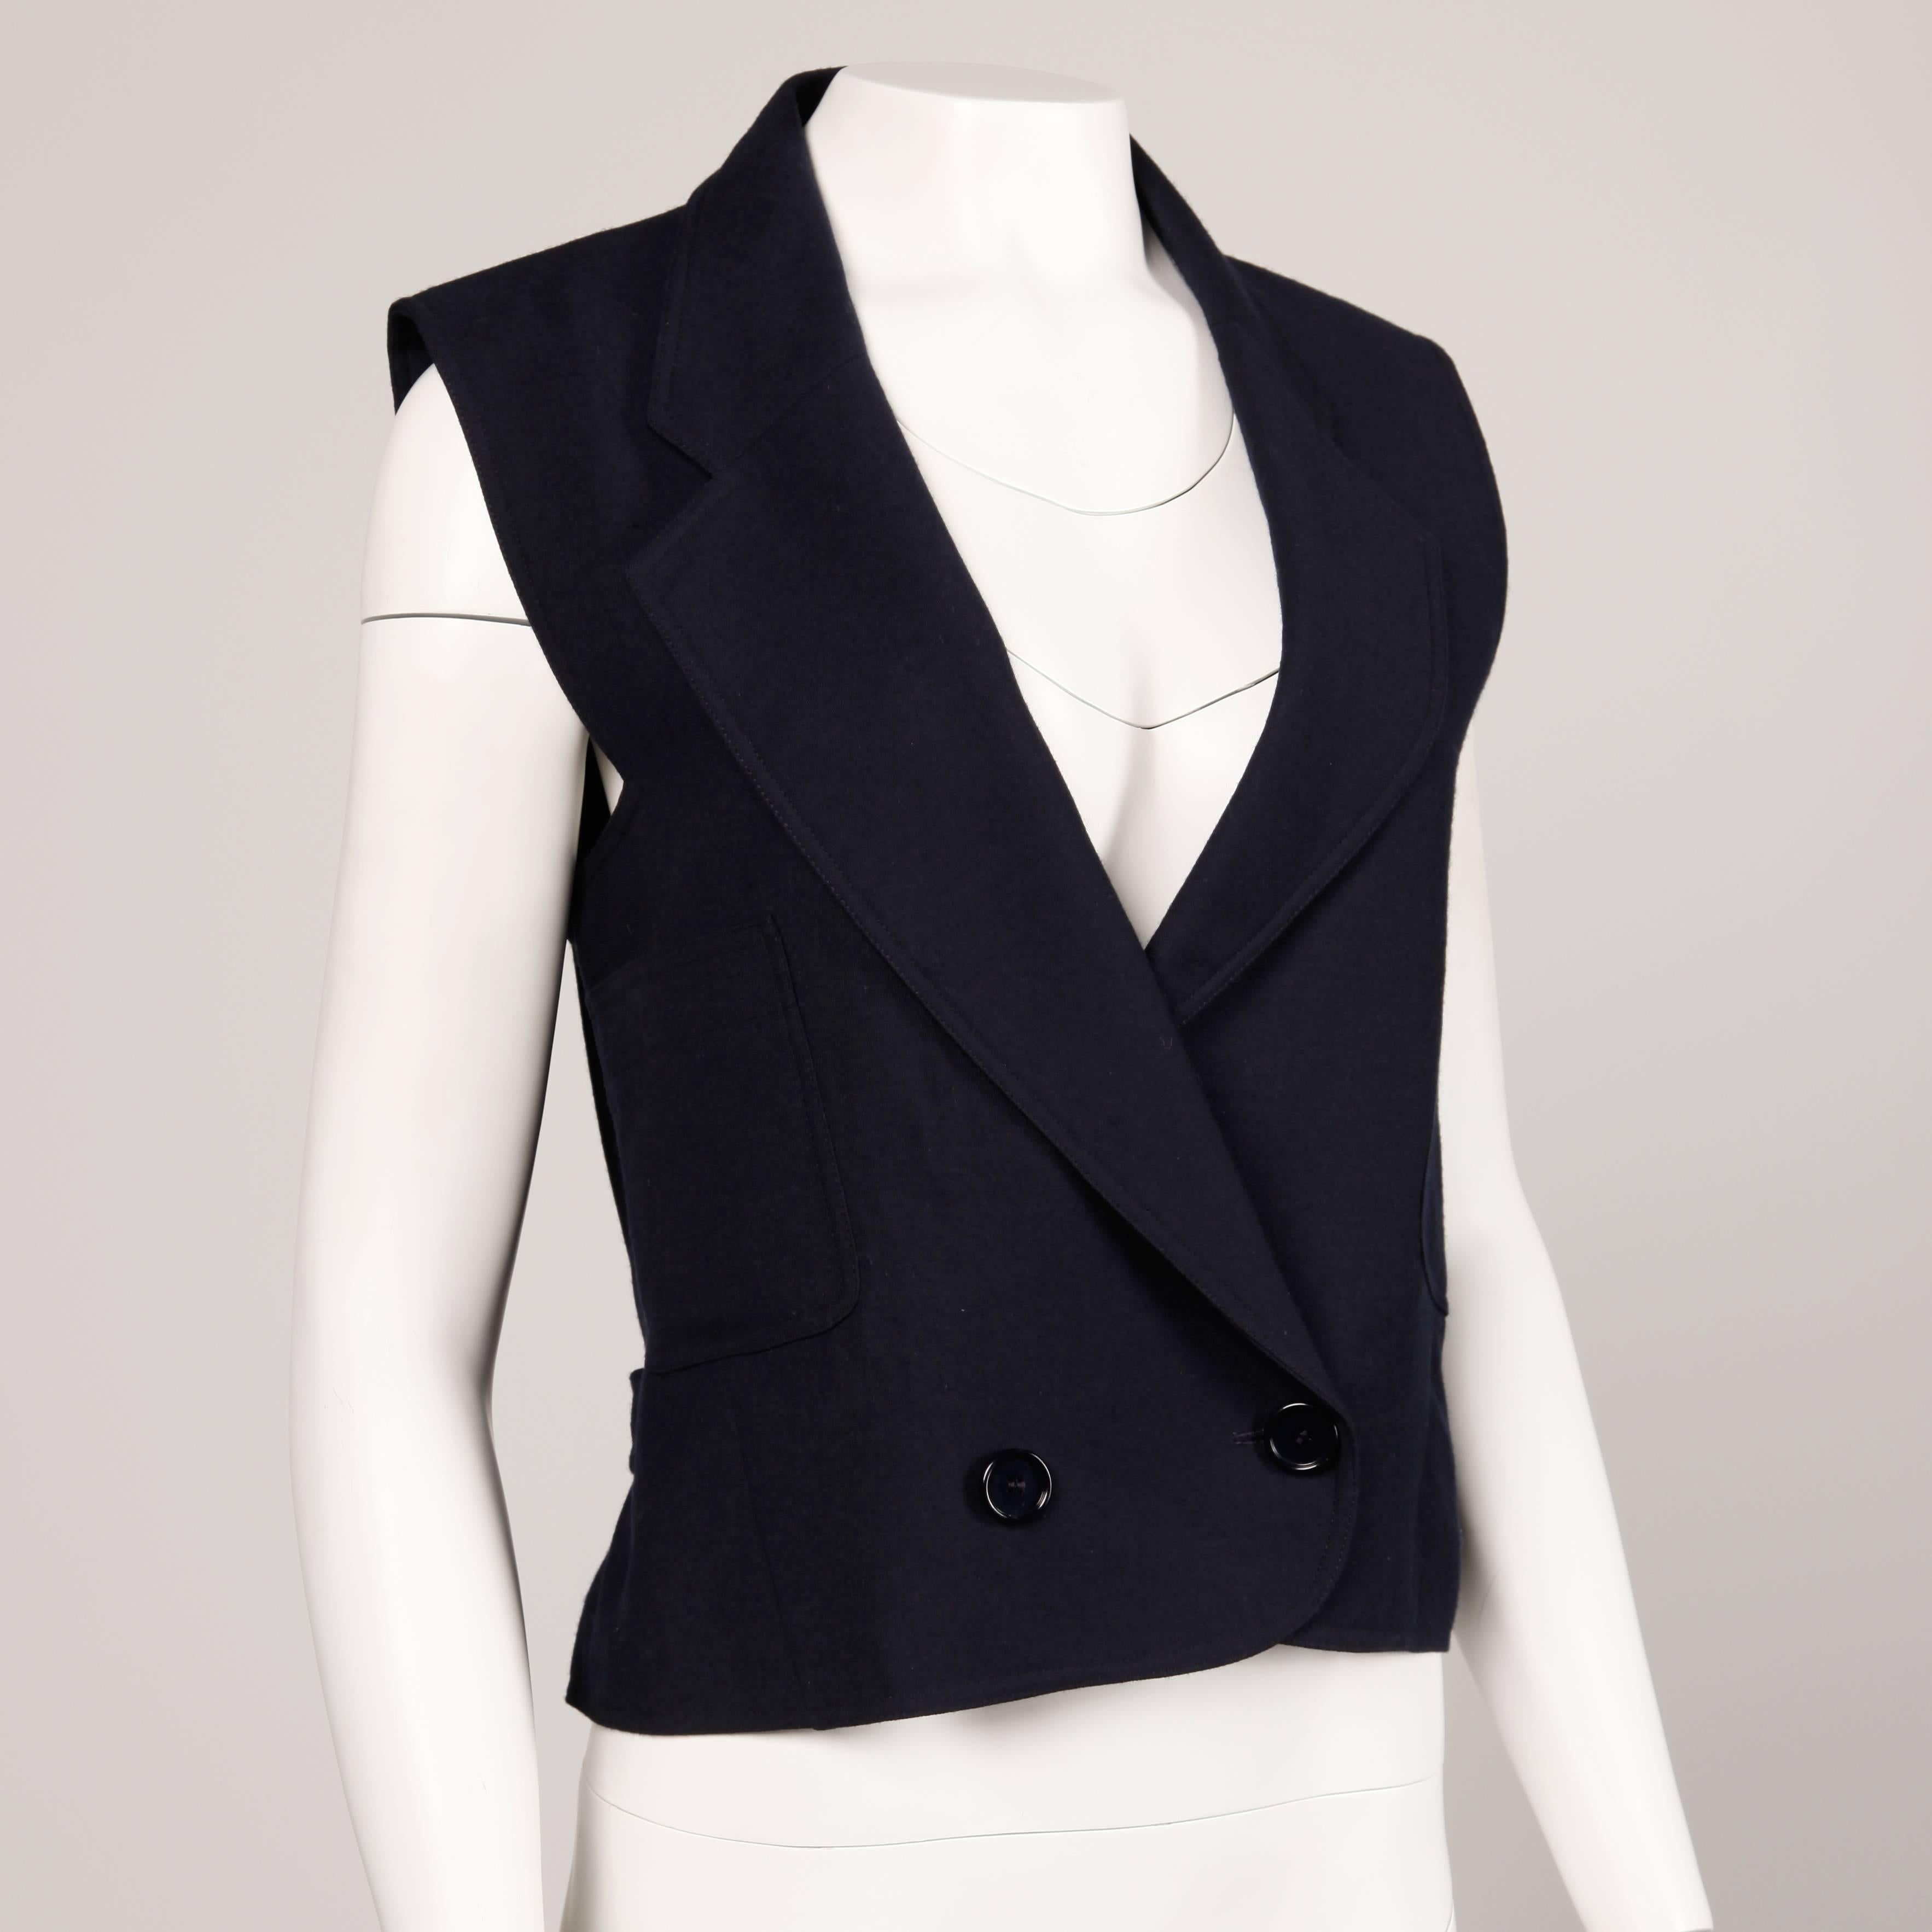 Beautifully done navy blue wool vest by Bernard Perris with back buckle detail. Fully lined. Fits like a modern size small-medium. The bust measures 38", waist 34", and total length 22". Excellent condition with no noted flaws.